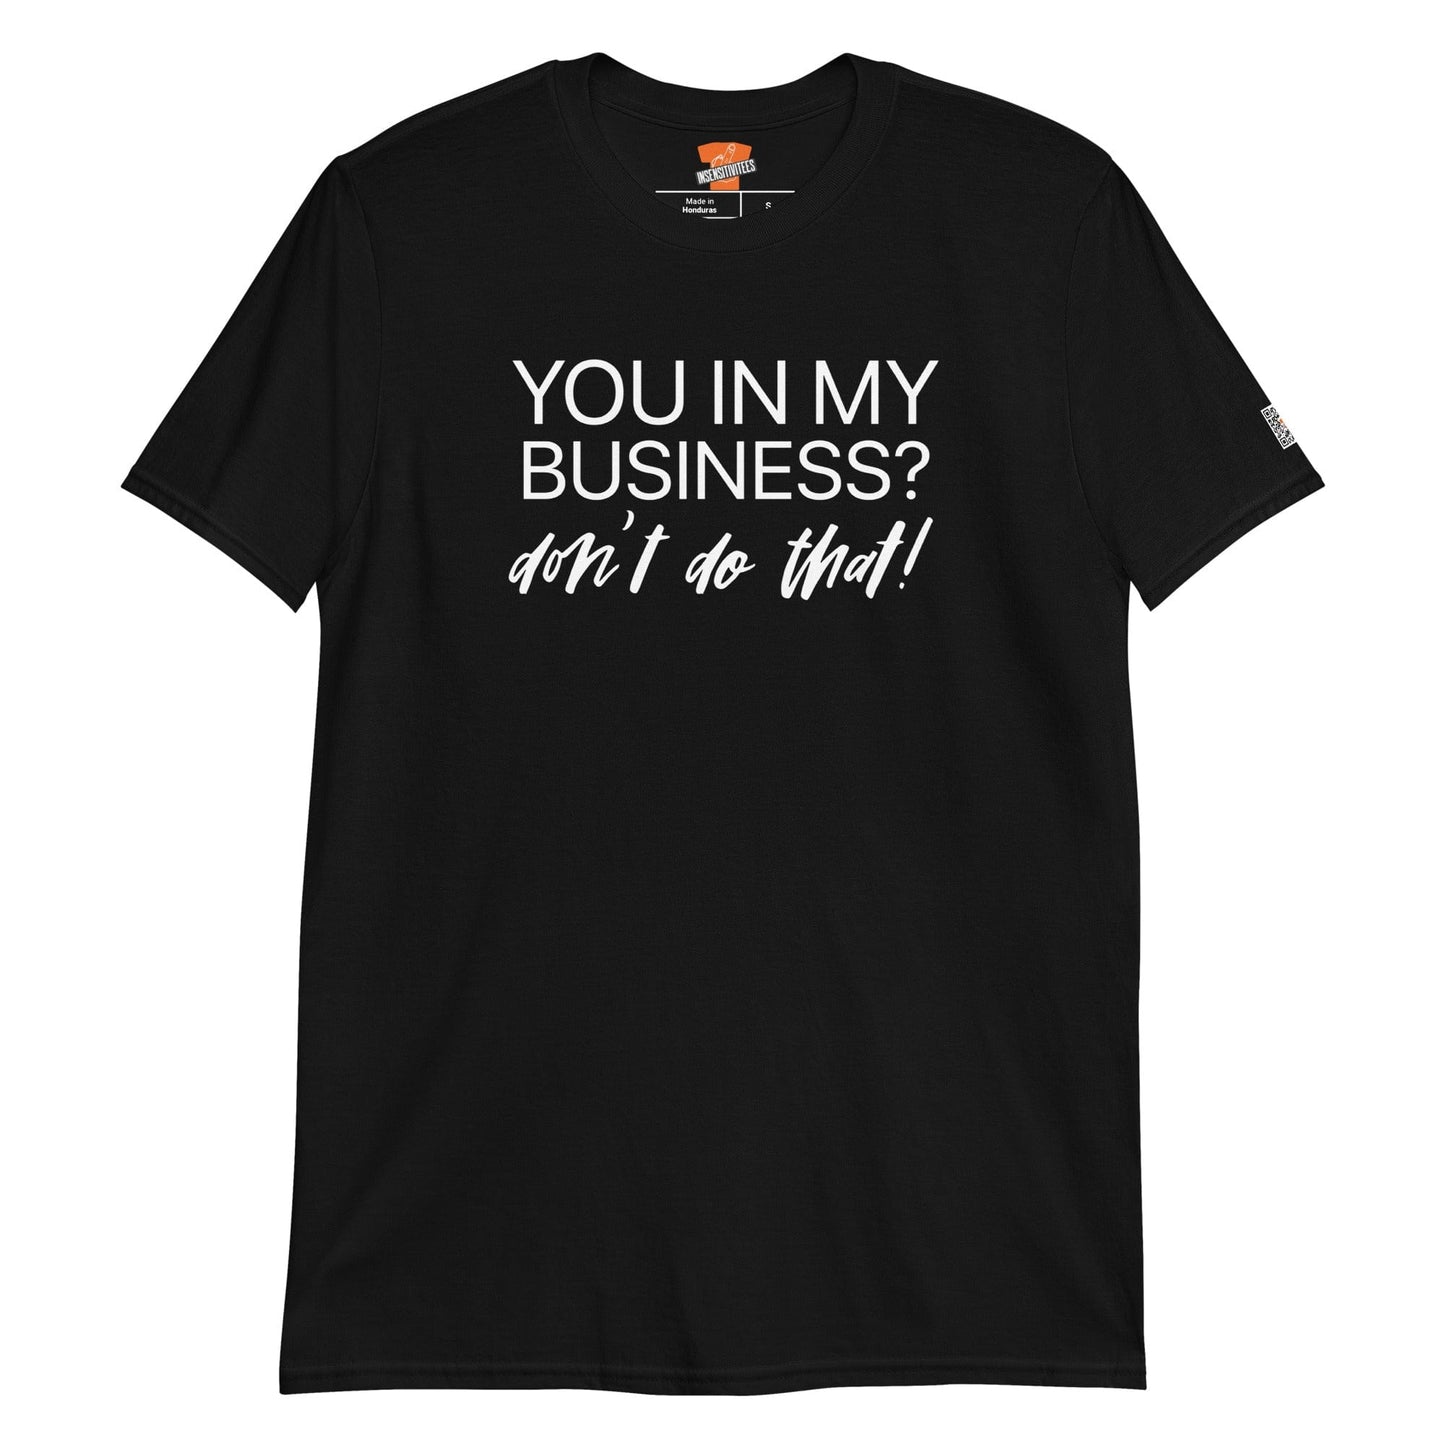 InsensitiviTees™️ Black You In My Business? Unisex T-Shirt